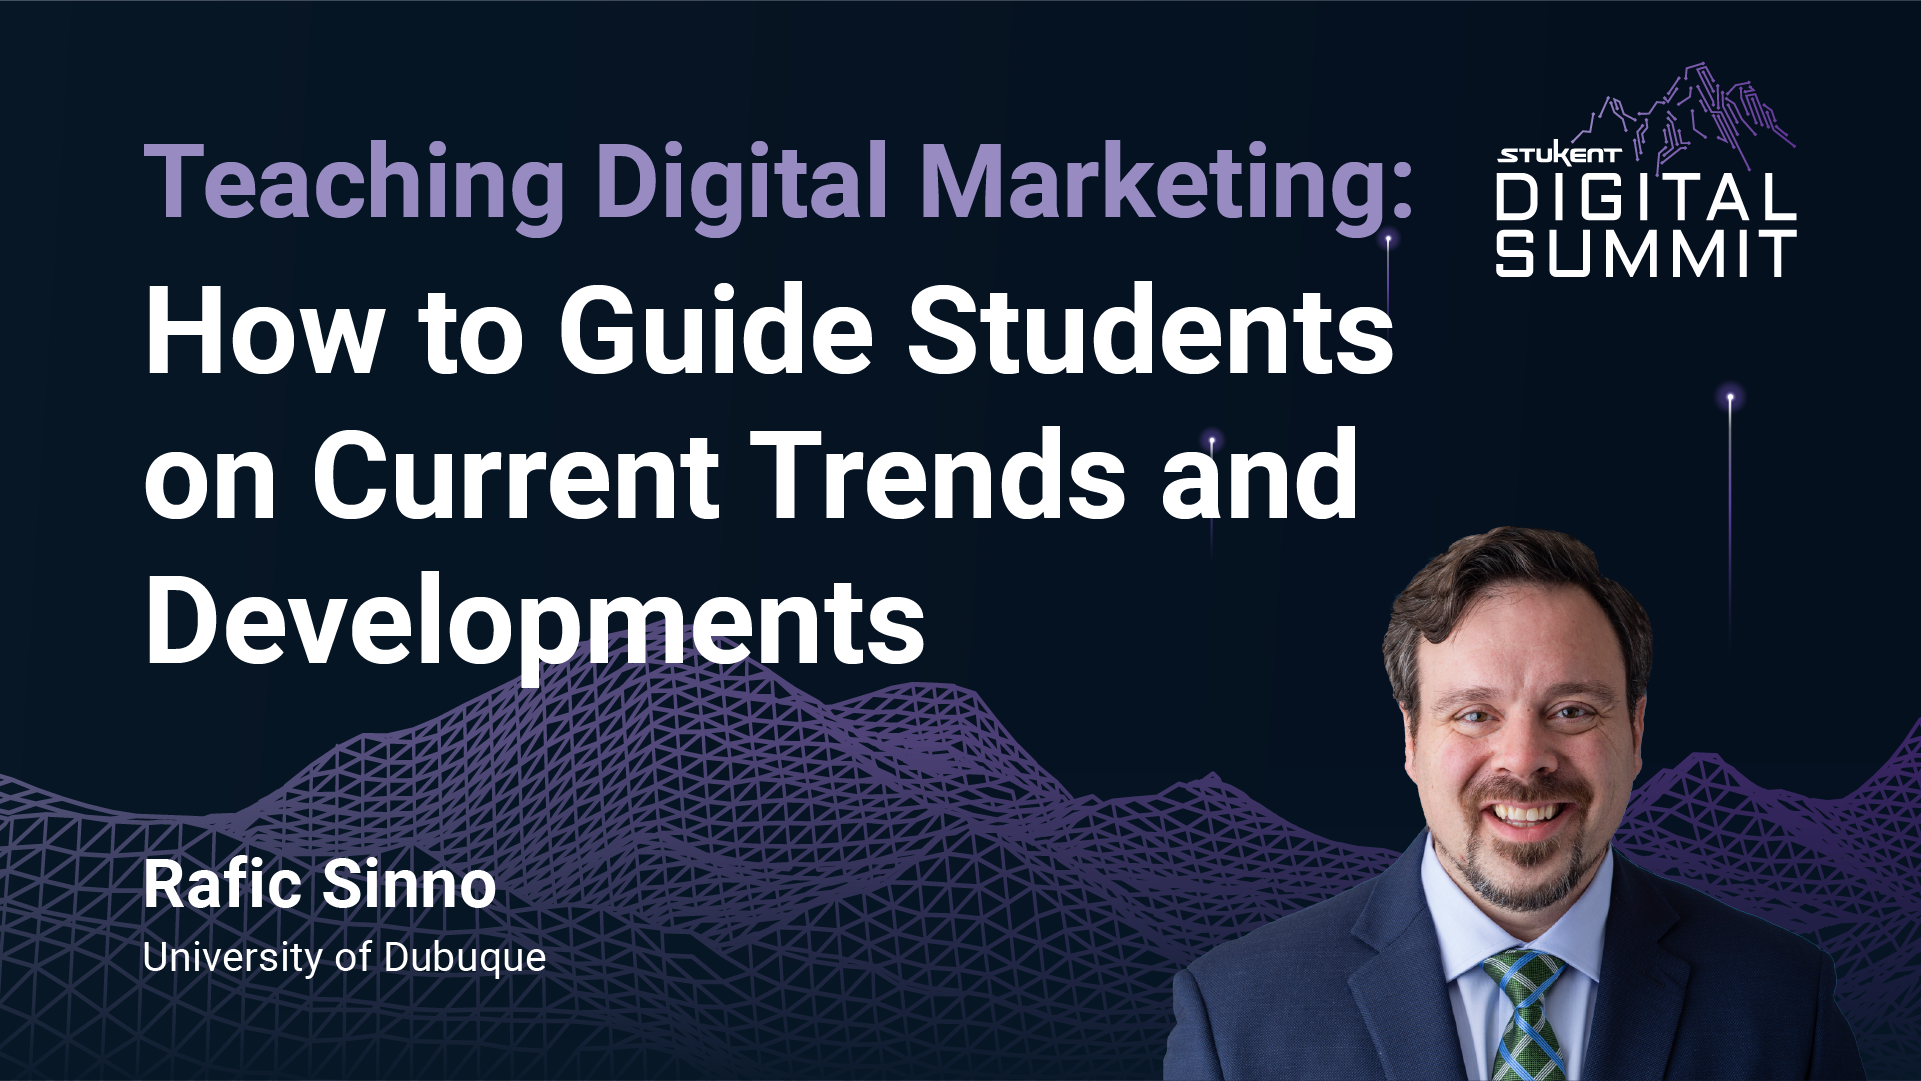 Teaching Digital Marketing: How to Guide Students on Current Trends and Developments